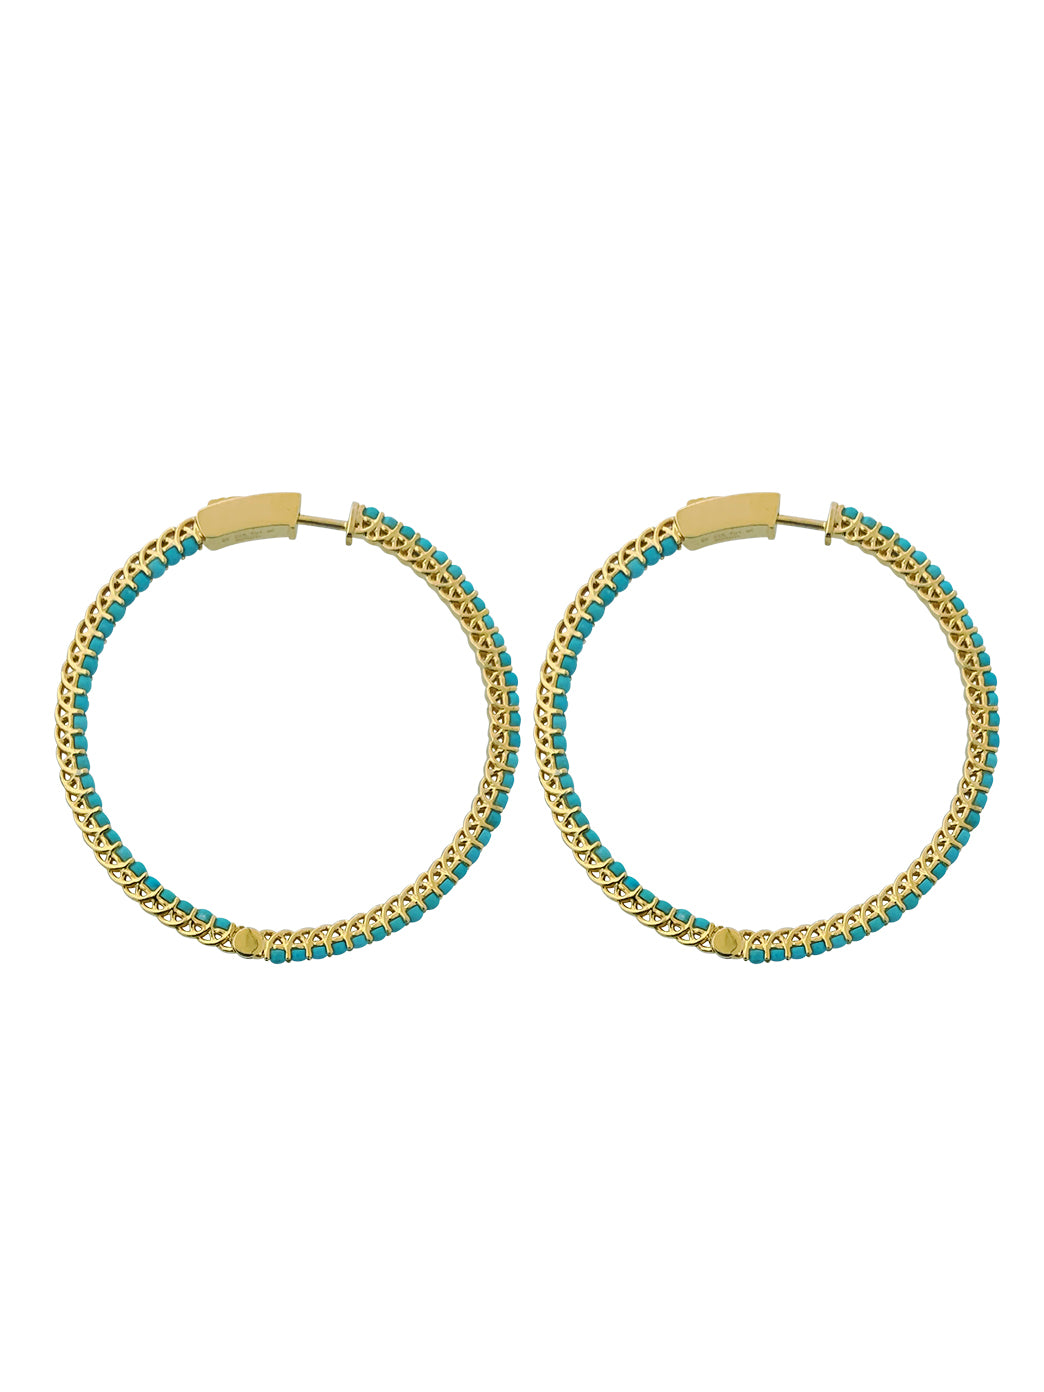 Fiorina Jewellery Gold and Turquoise Hoops Round Side View